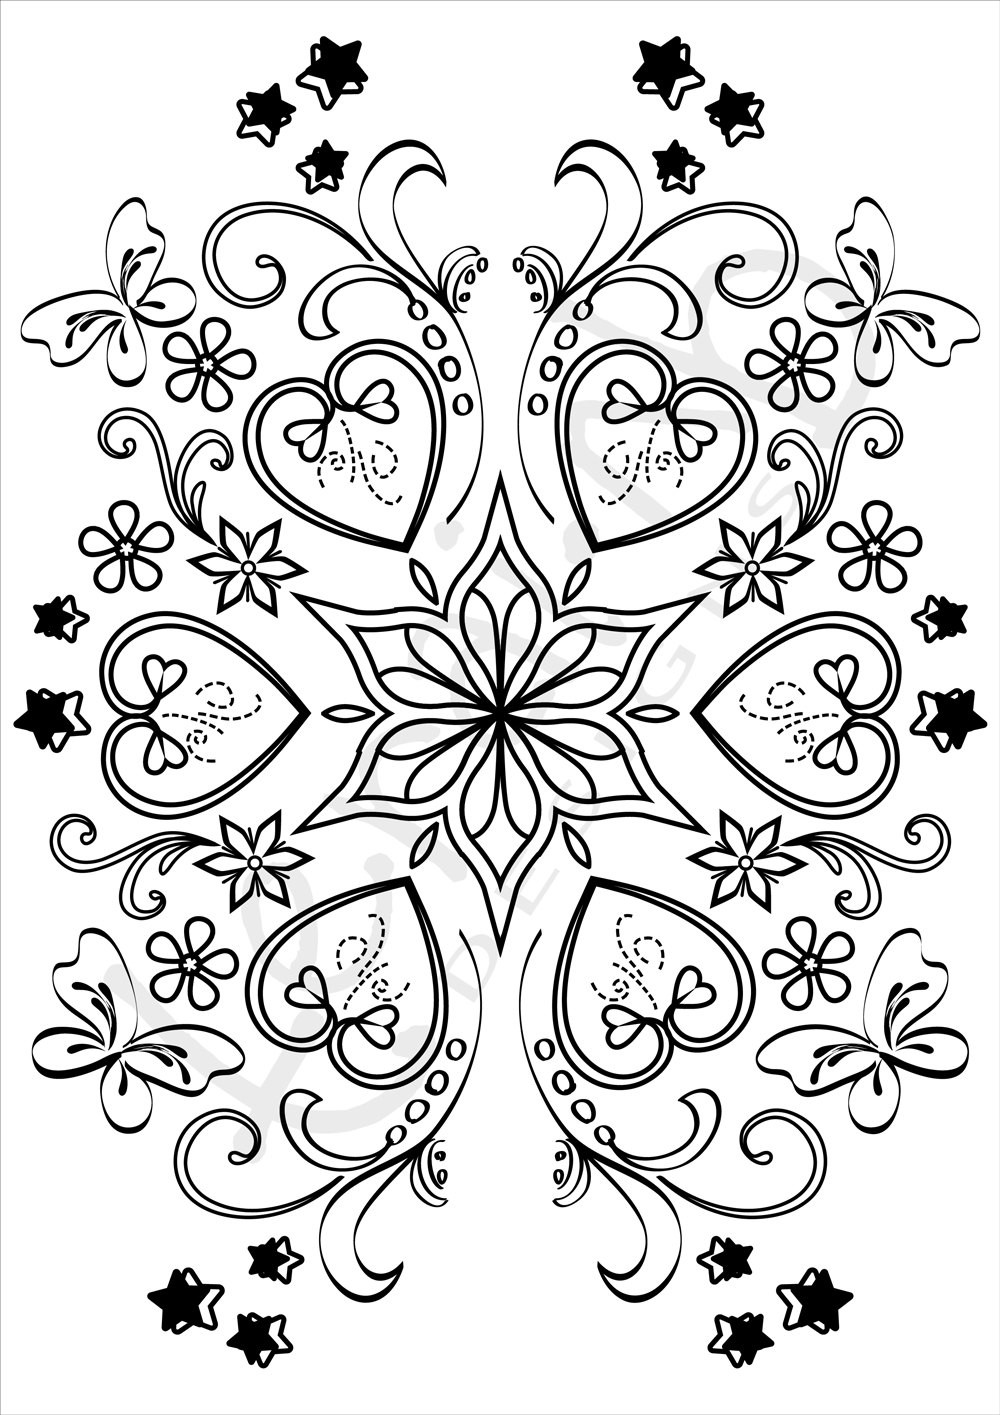 Heart Coloring Pages For Adults
 Hearts Colouring page Adult Doodle Art Valentine Colouring